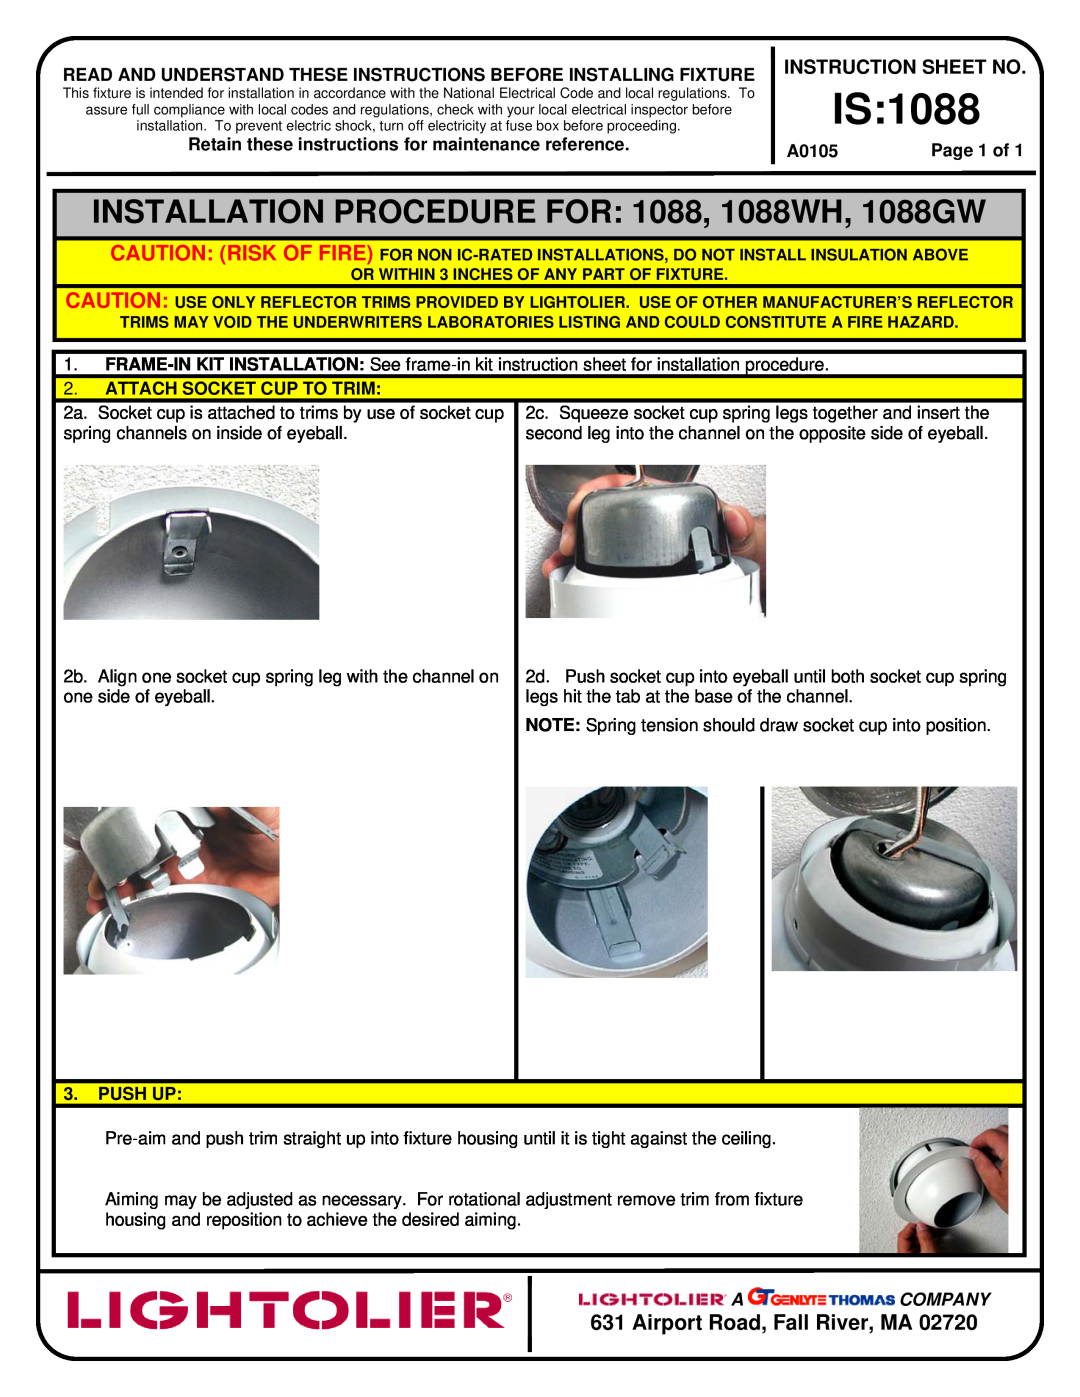 Lightolier instruction sheet Is, INSTALLATION PROCEDURE FOR 1088, 1088WH, 1088GW, Airport Road, Fall River, MA, A0105 